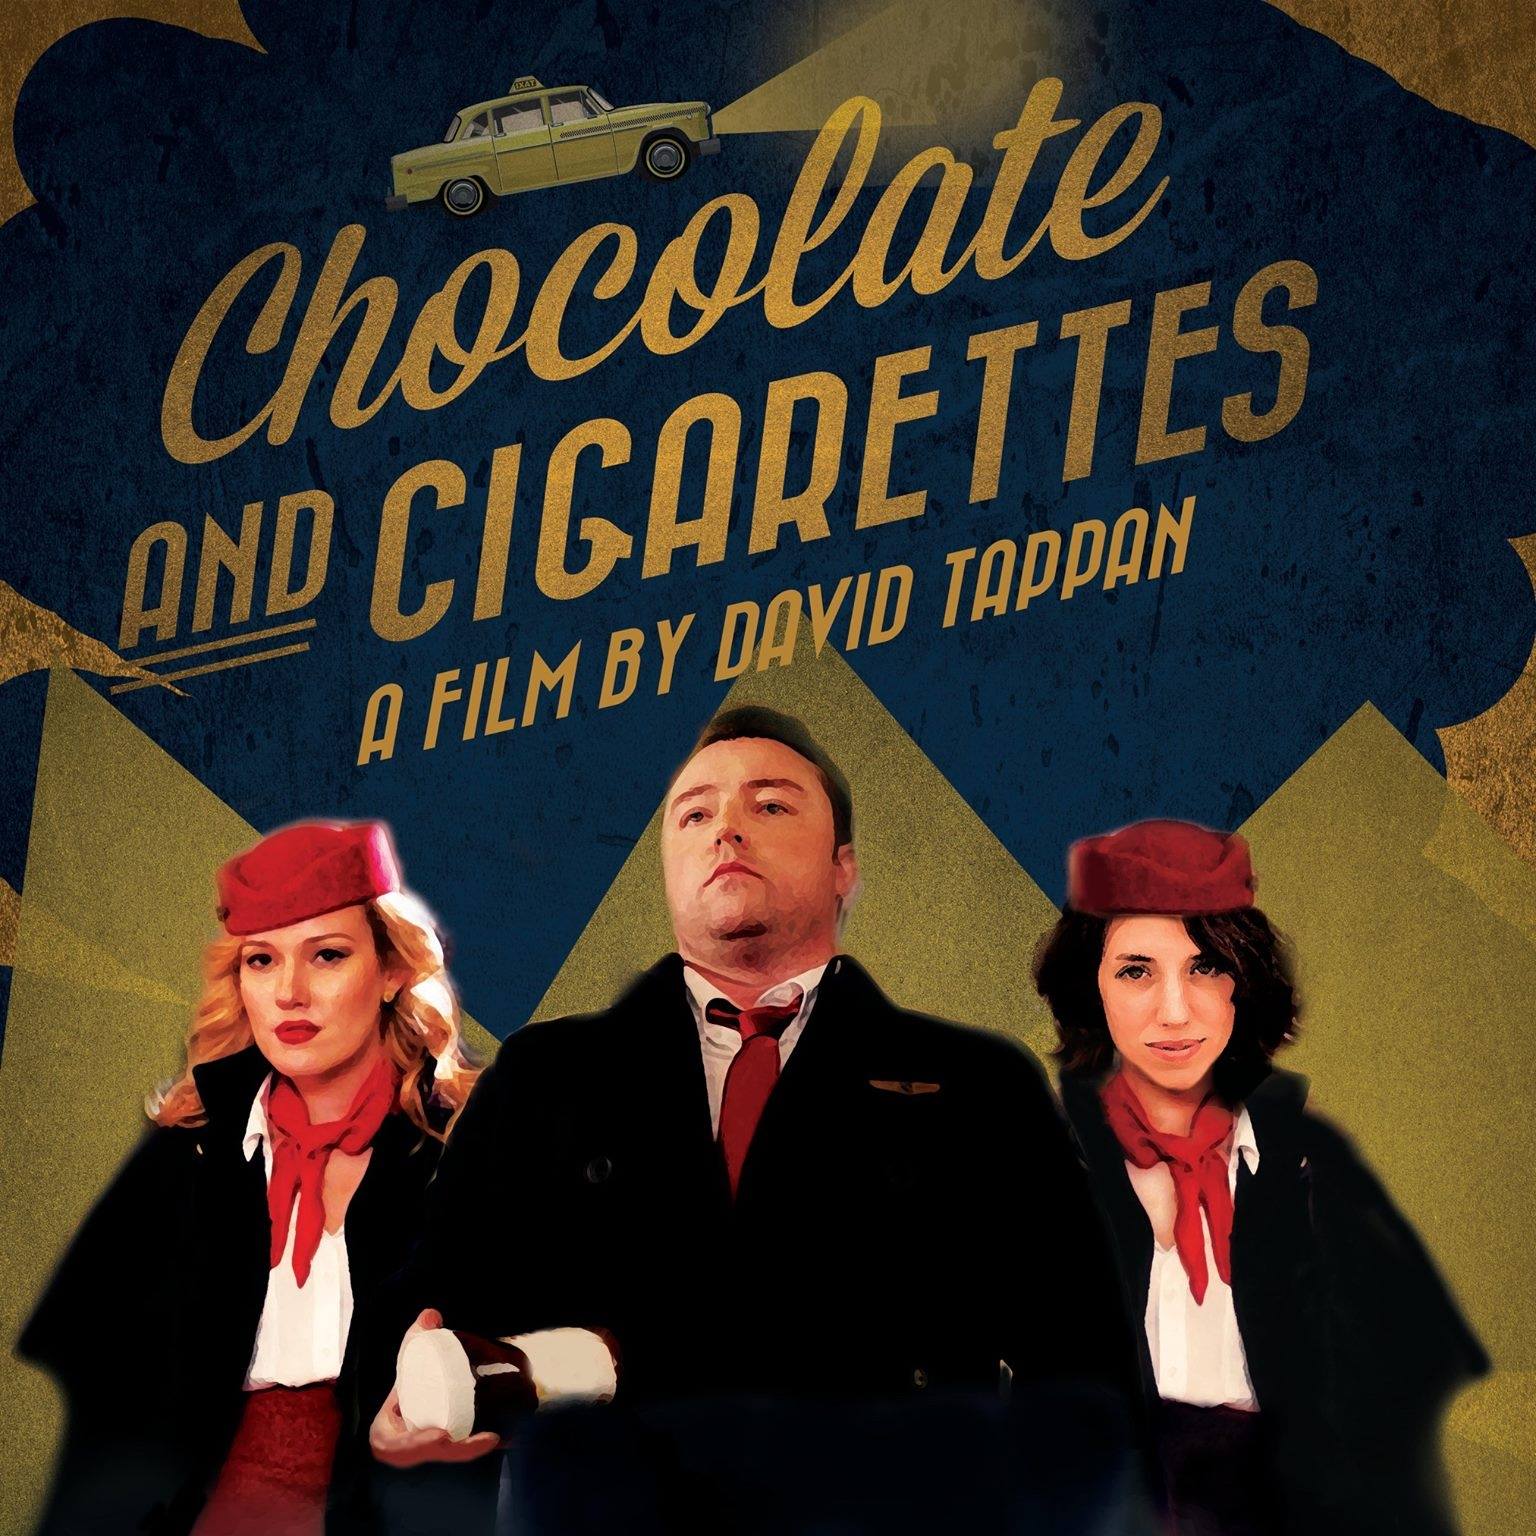 Chocolate and Cigarettes